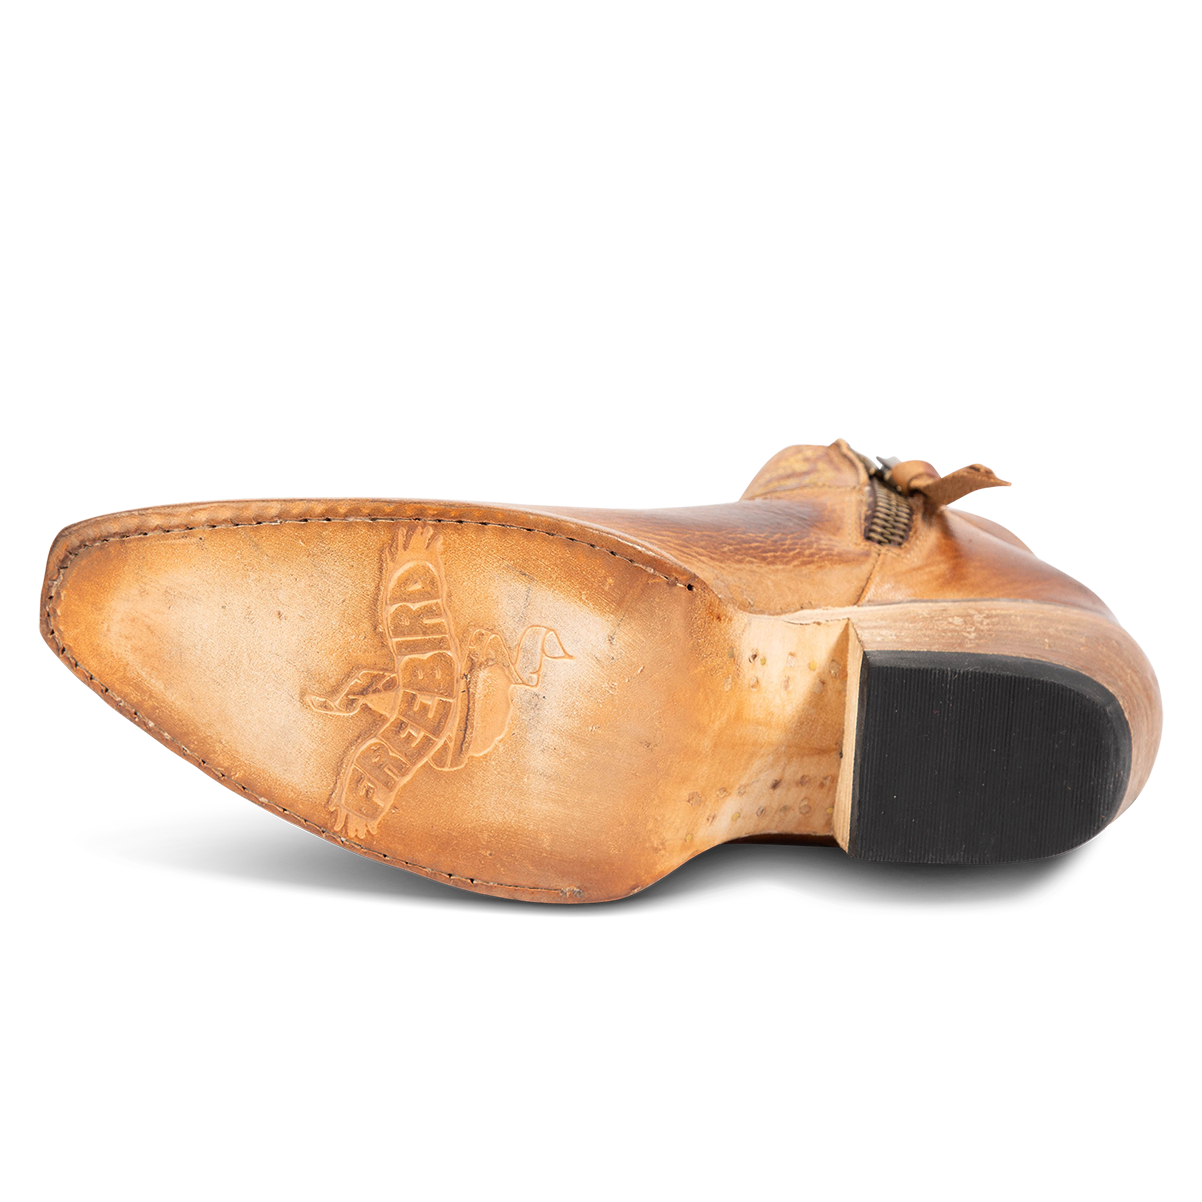 Leather sole imprinted with FREEBIRD on women's Wolfie wheat leather boot